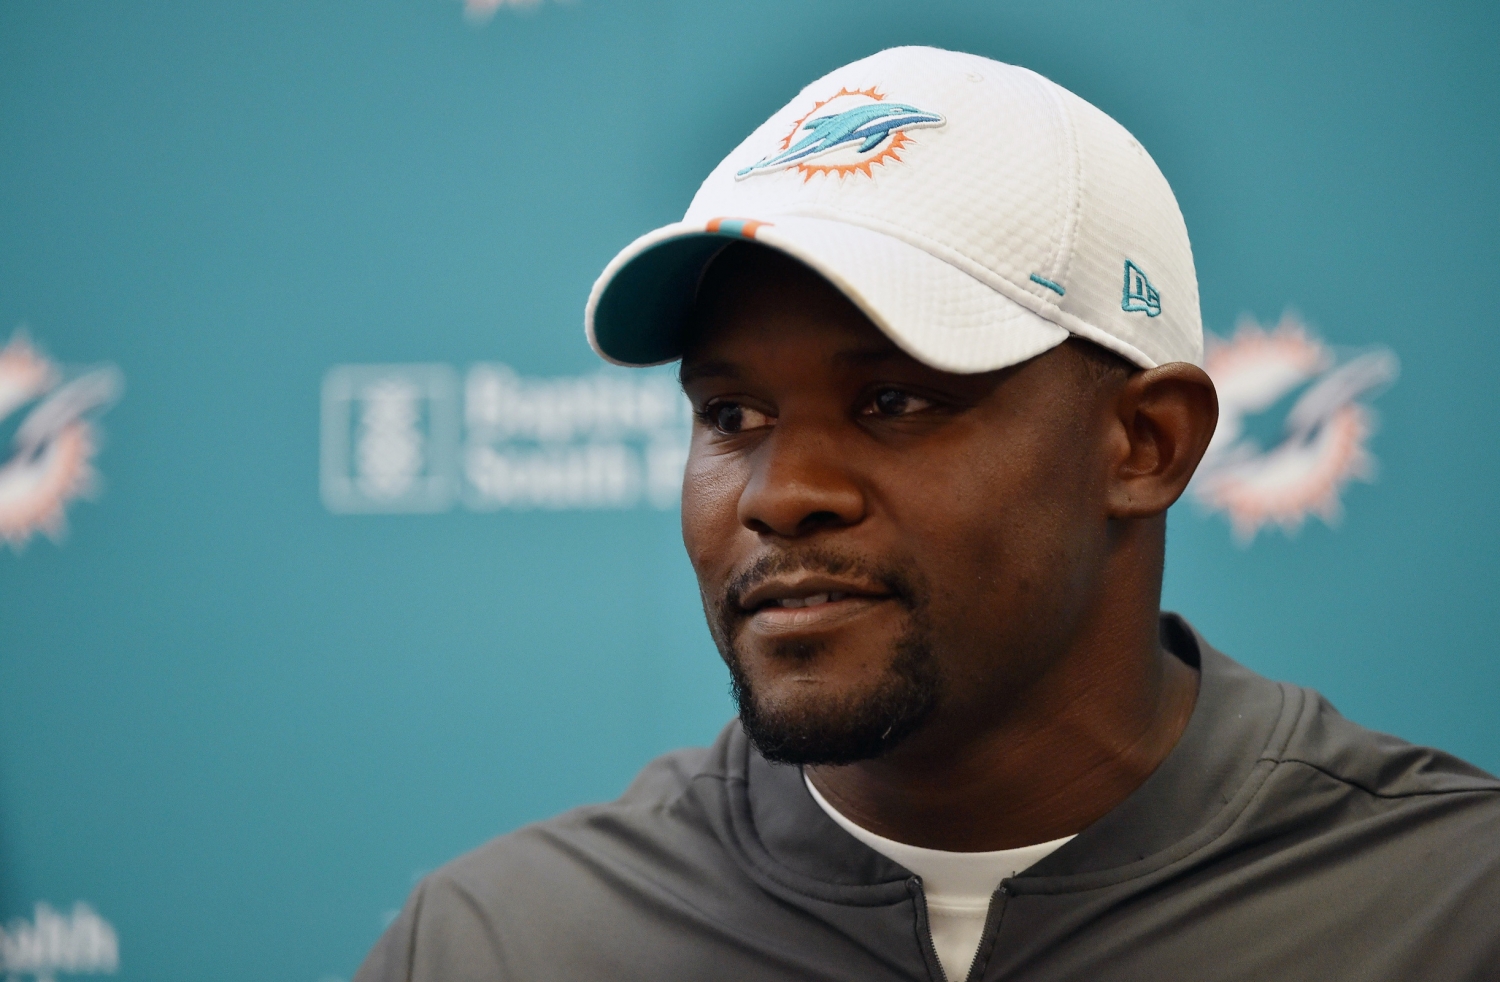 Dolphins coach Brian Flores says will be in for a long season in 2019 with young, inexperienced Dolphins team.